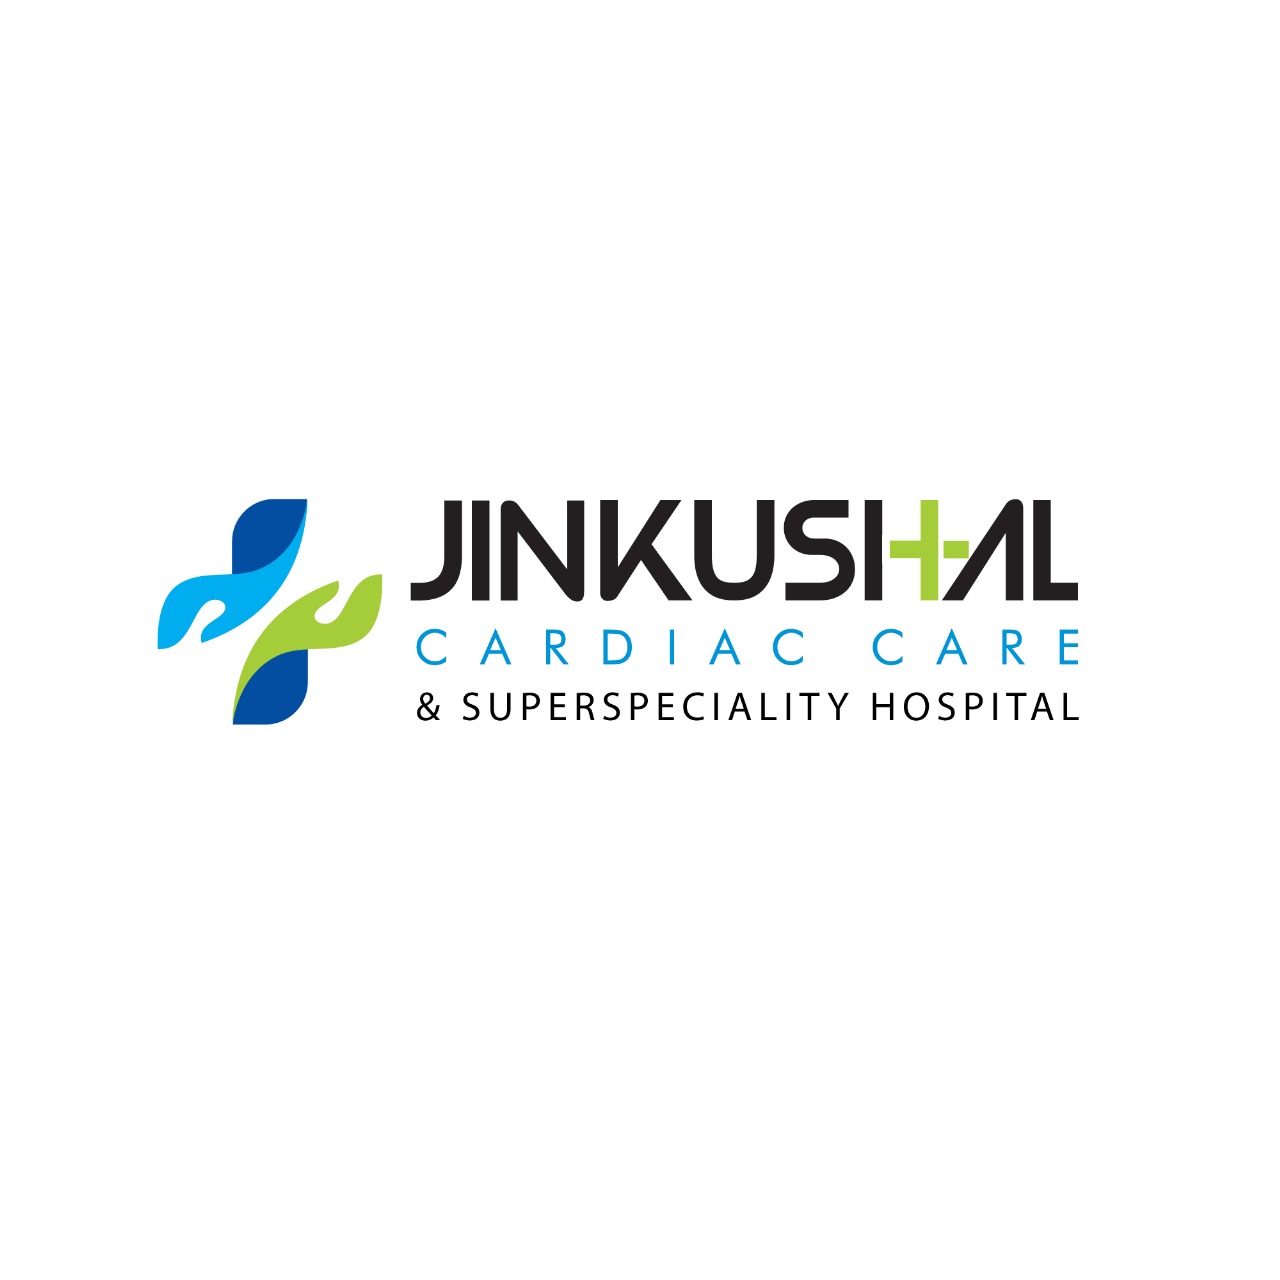 Jinkushal Cardiac Care & Superspeciality Hospital|Veterinary|Medical Services